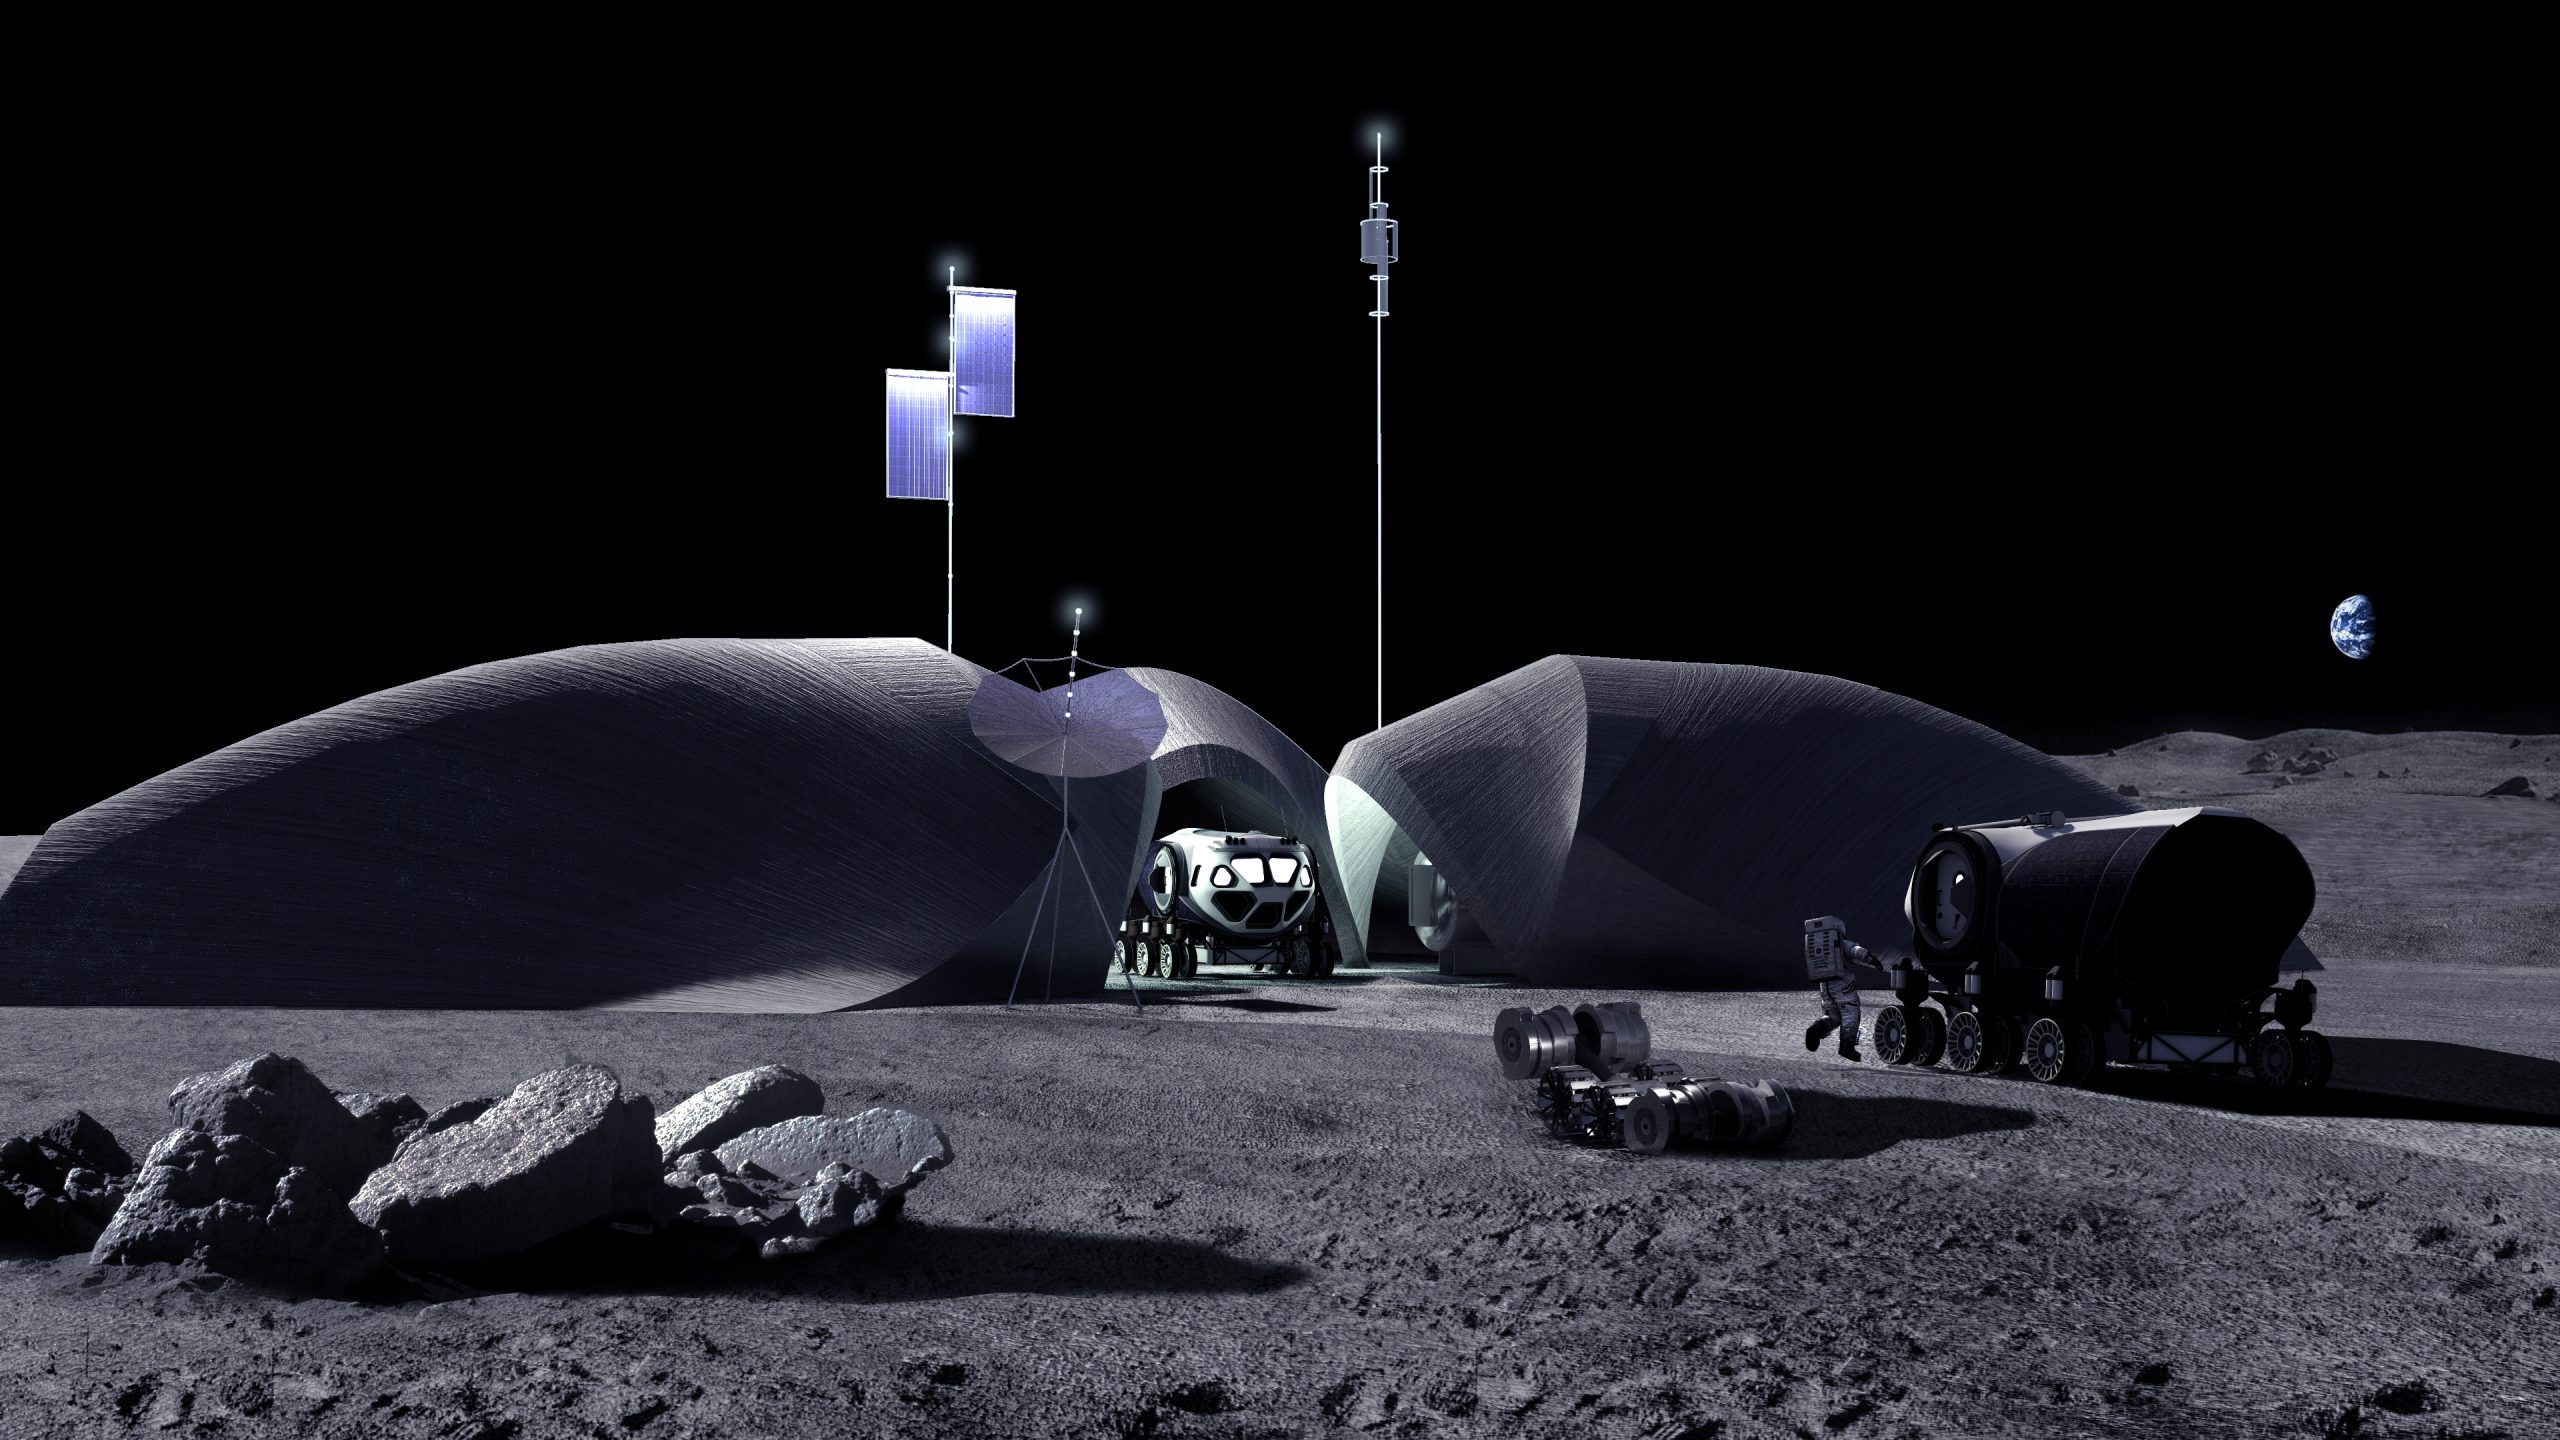 A render of the 3D printed LINA lunar outpost. Image via AI SpaceFactory.